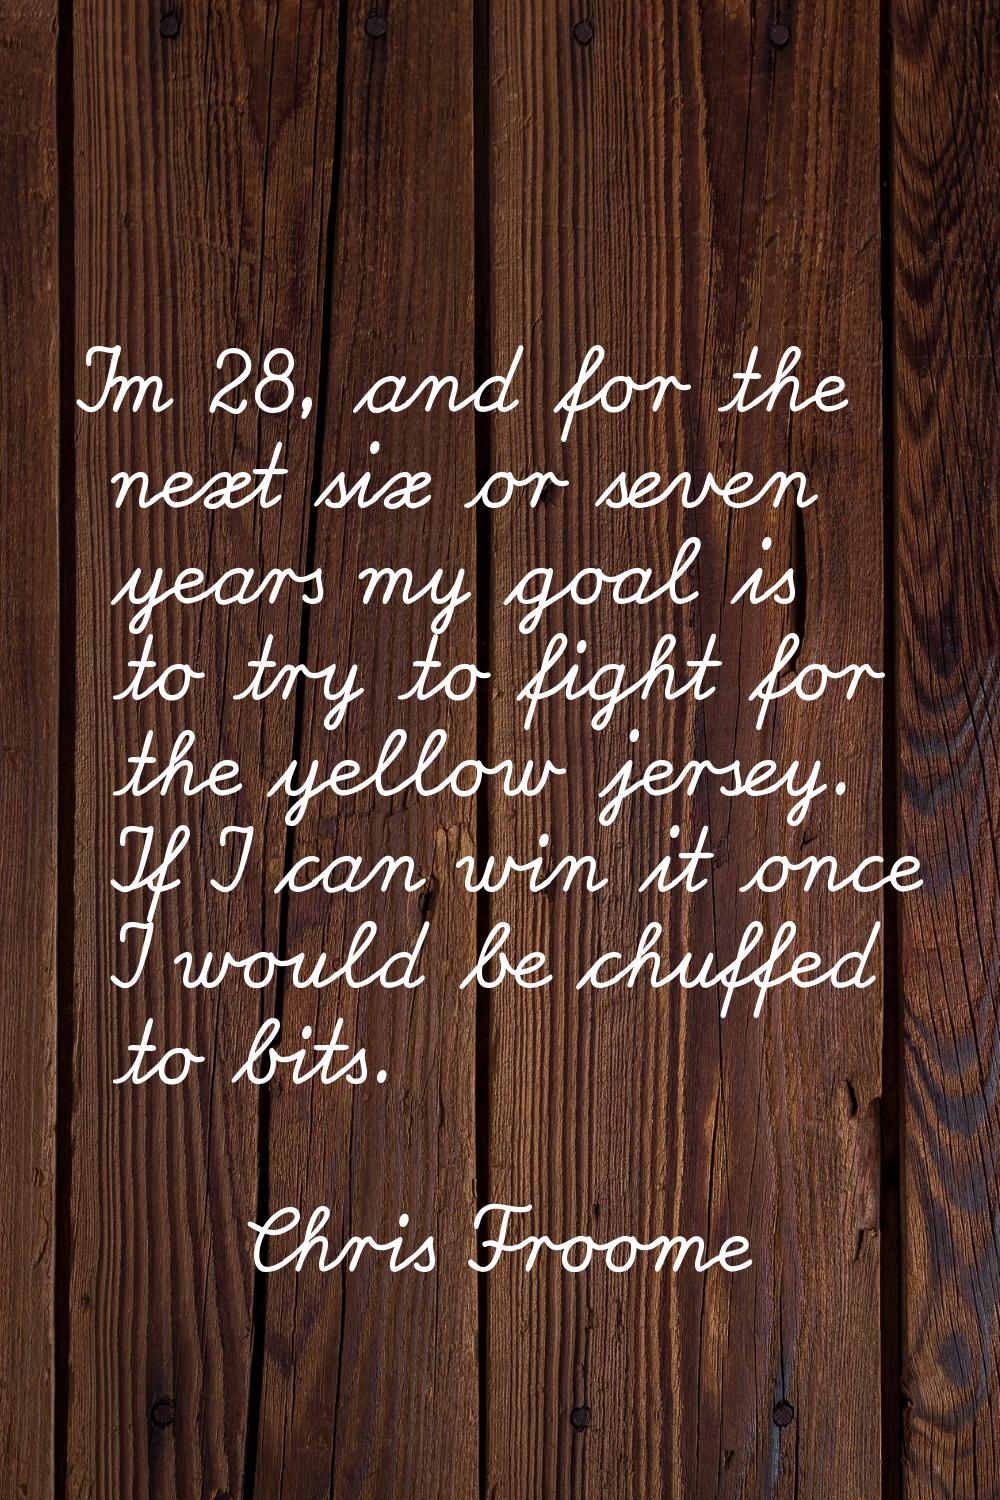 I'm 28, and for the next six or seven years my goal is to try to fight for the yellow jersey. If I 